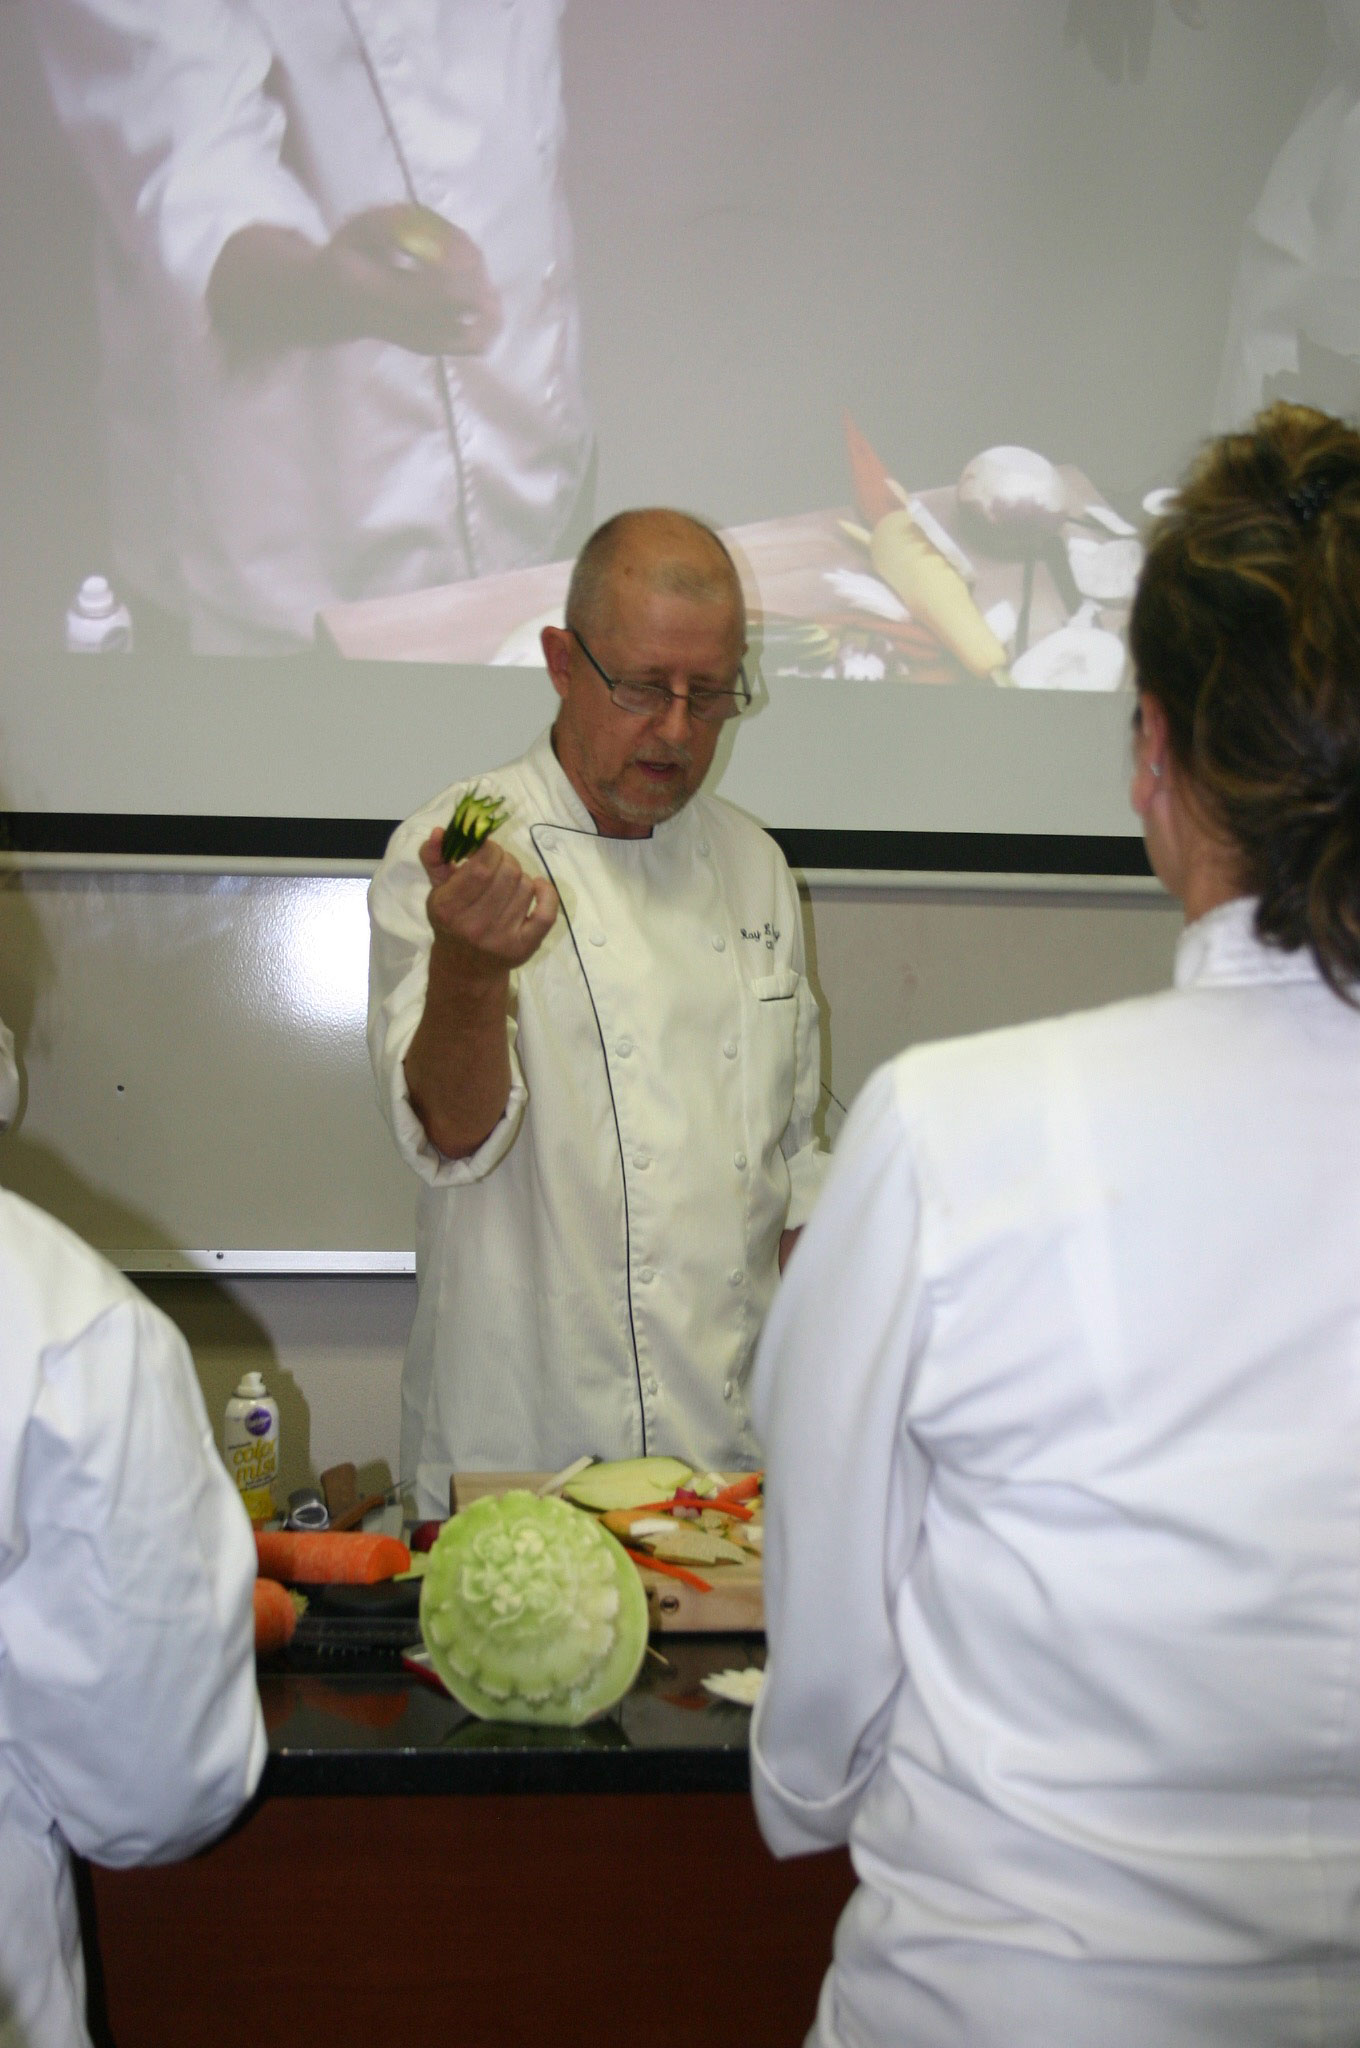 Visiting culinary artist Ray Duey shows Bates College students how to garnish fruits and vegetables. Credit: David Guest / TDI